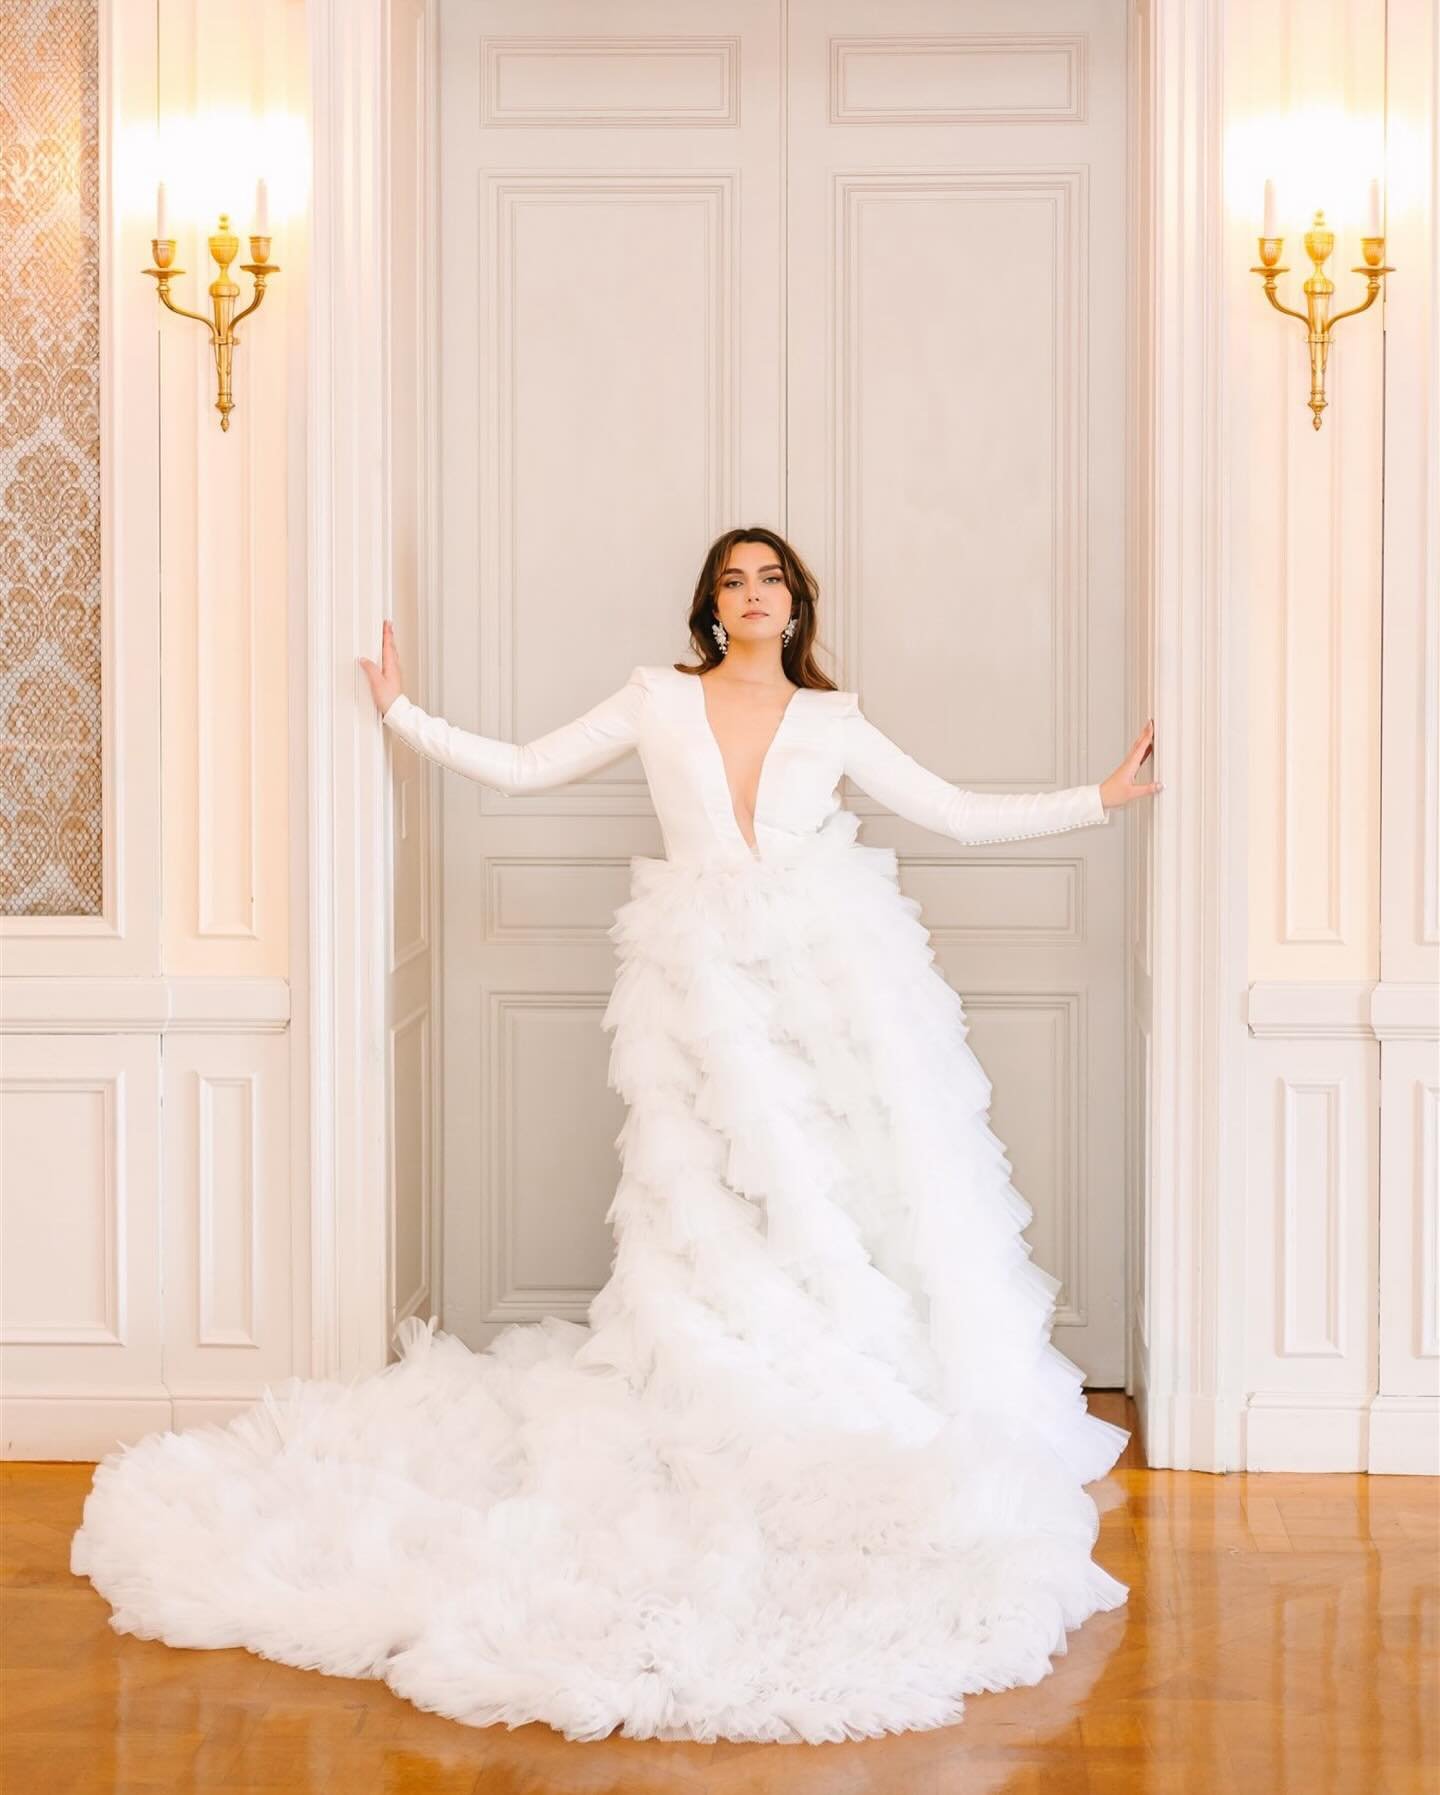 Can we just take a moment for this dress??
.
.
.
.
.
.
.
.
.
.
Host &amp; Lead Photographer: @briannagracaweddings
Host &amp; Wedding Planner: &nbsp;@mkyourdreamday
Advisor: @rebeccacastonguayphotography
Florist: @botanicawedding
Venue: @glenmanorhou